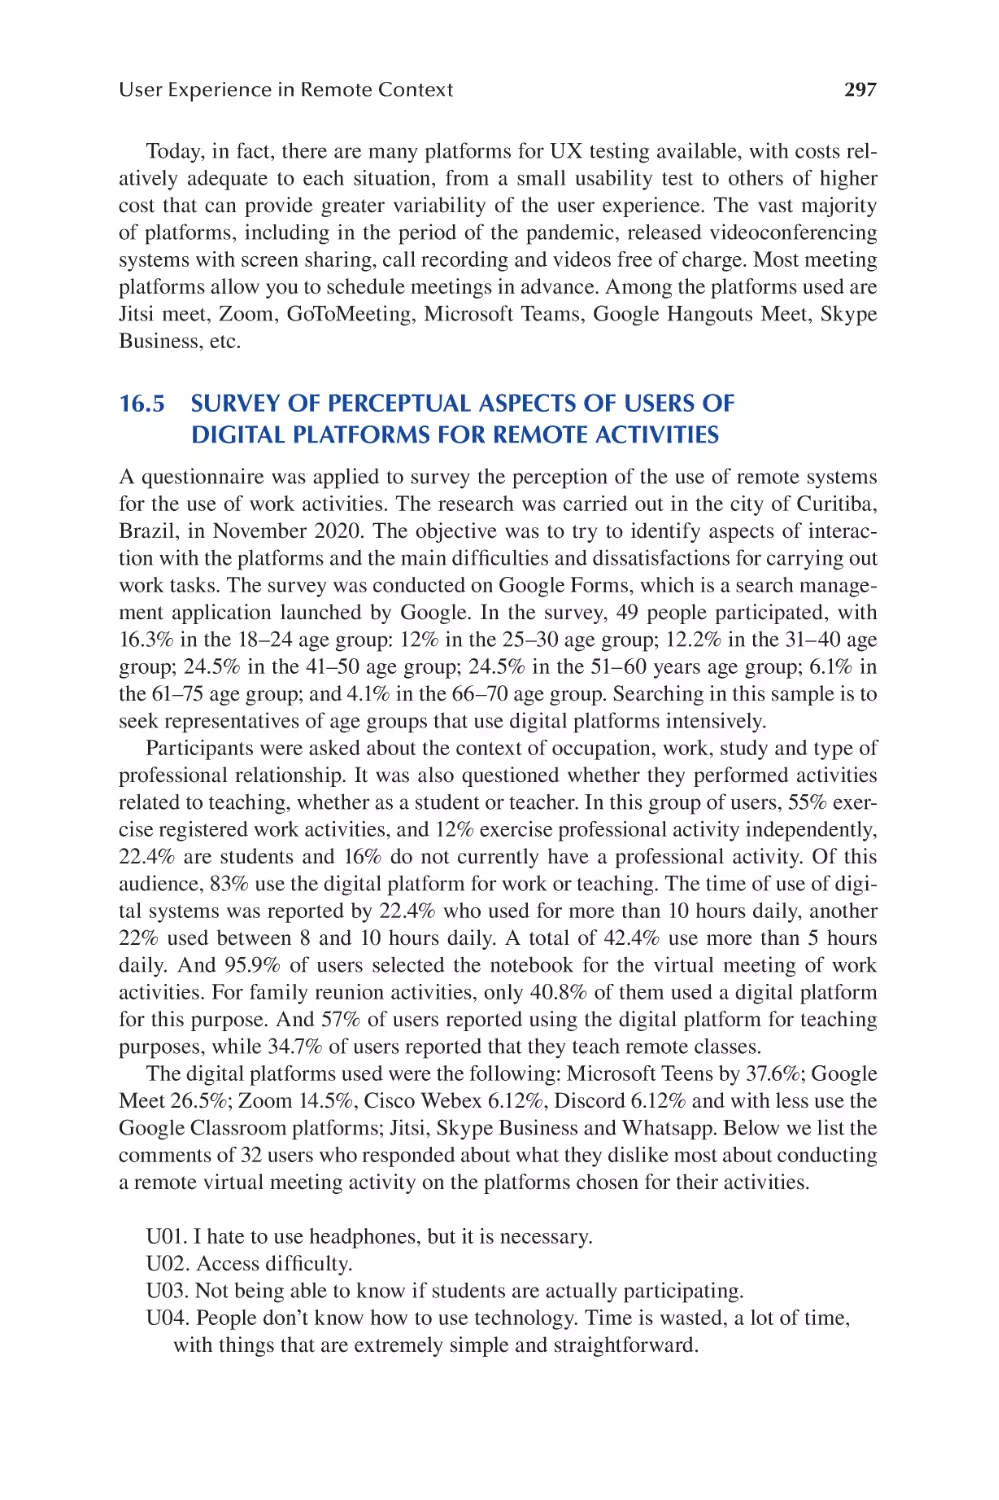 16.5 Survey of Perceptual Aspects of Users of Digital Platforms for Remote Activities